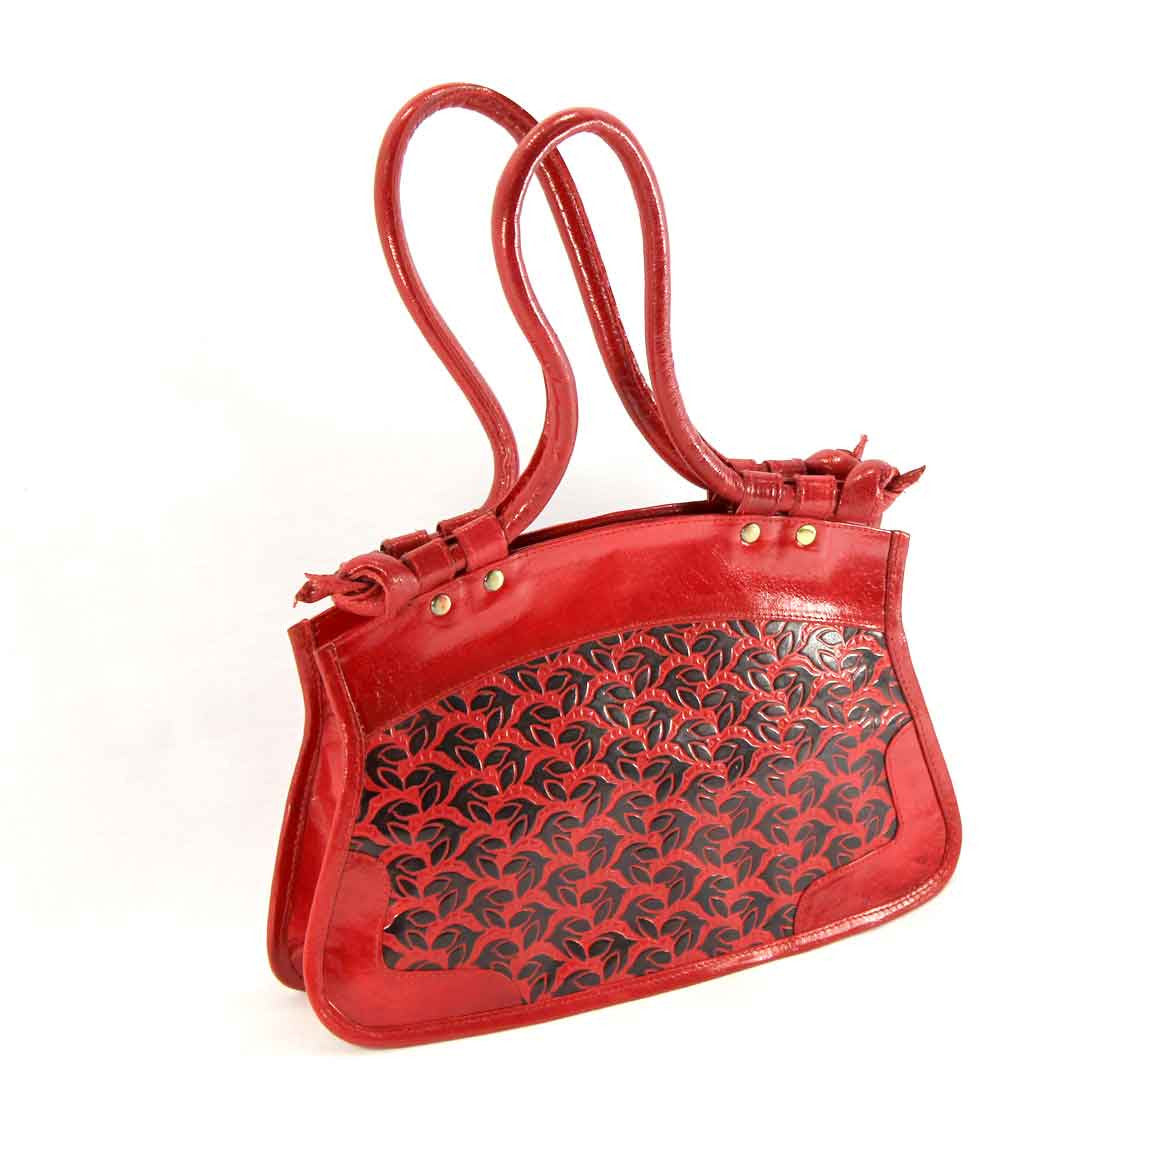 Fair Trade Ethical Red Leather Bag